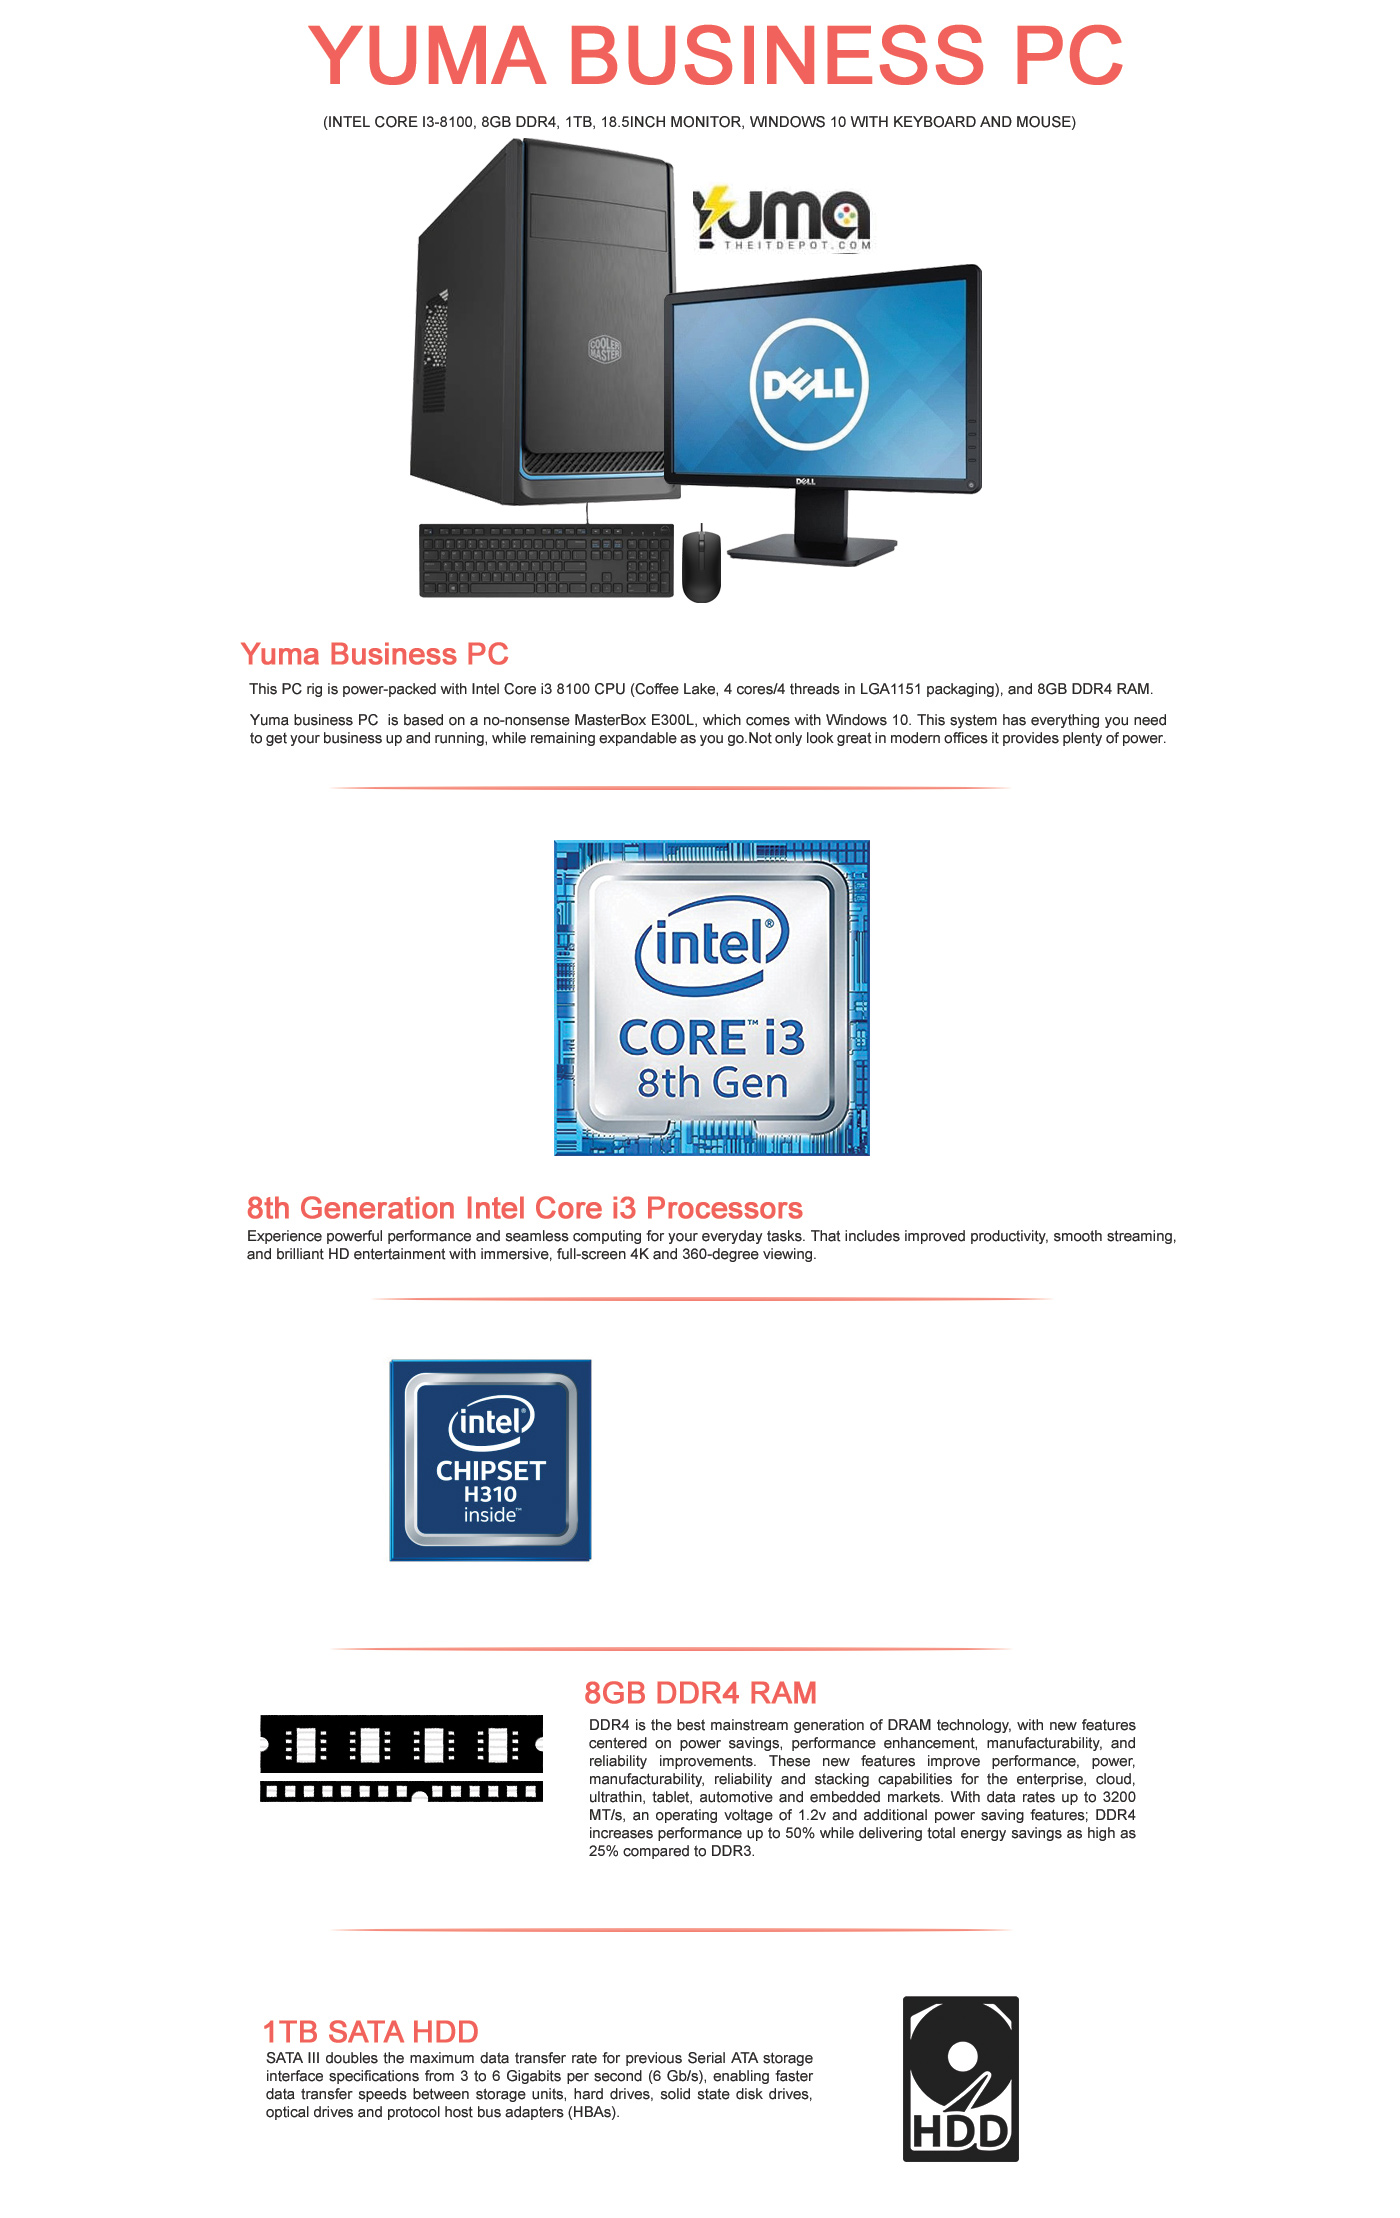  Buy Online Yuma Business PC (Intel Core i3-8100, 8GB DDR4, 1TB, 18.5inch Monitor, Windows 10 with Keyboard and Mouse)